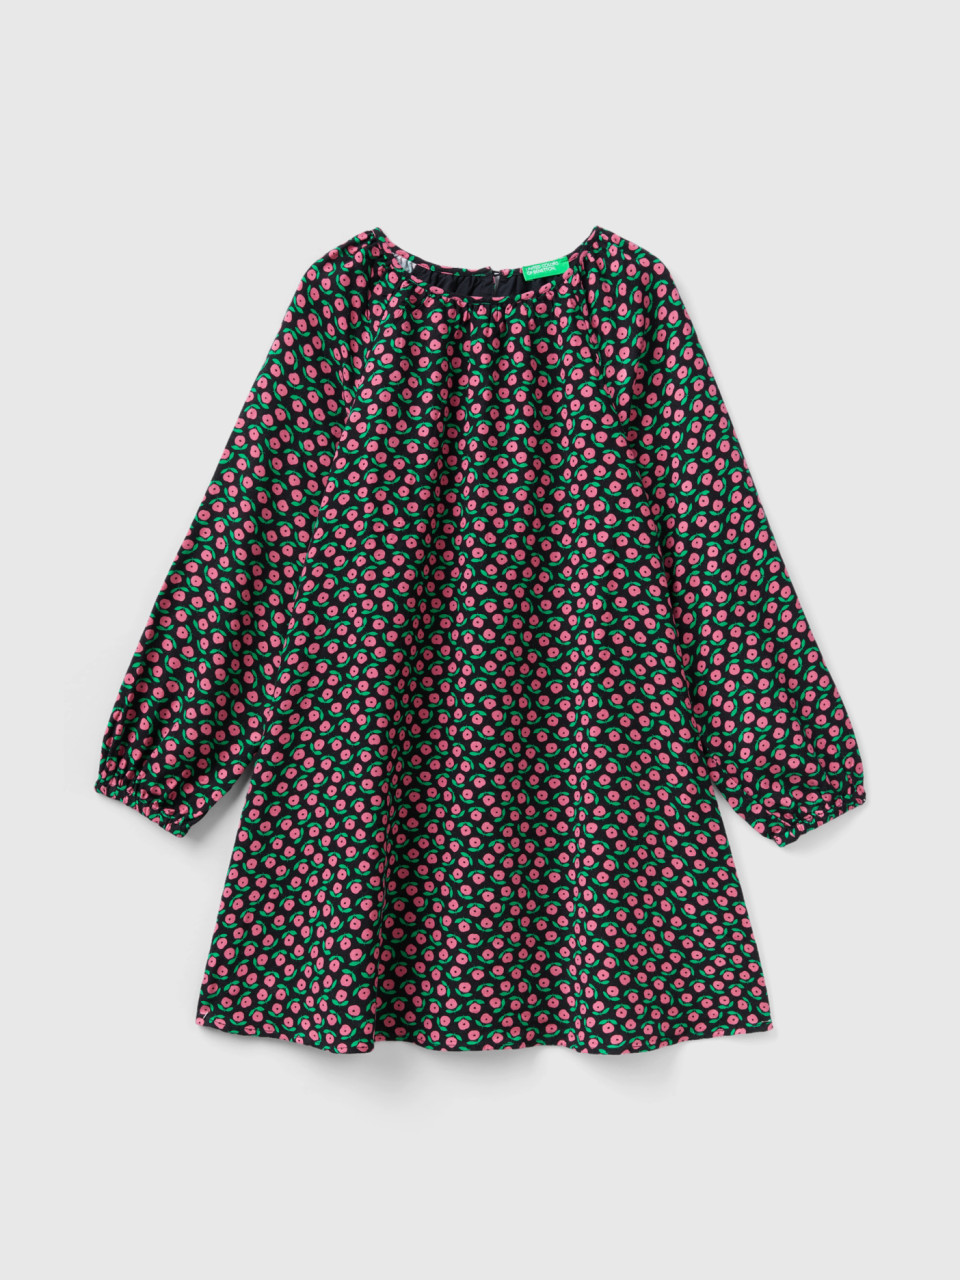 Benetton, Dress With Floral Print, Multi-color, Kids